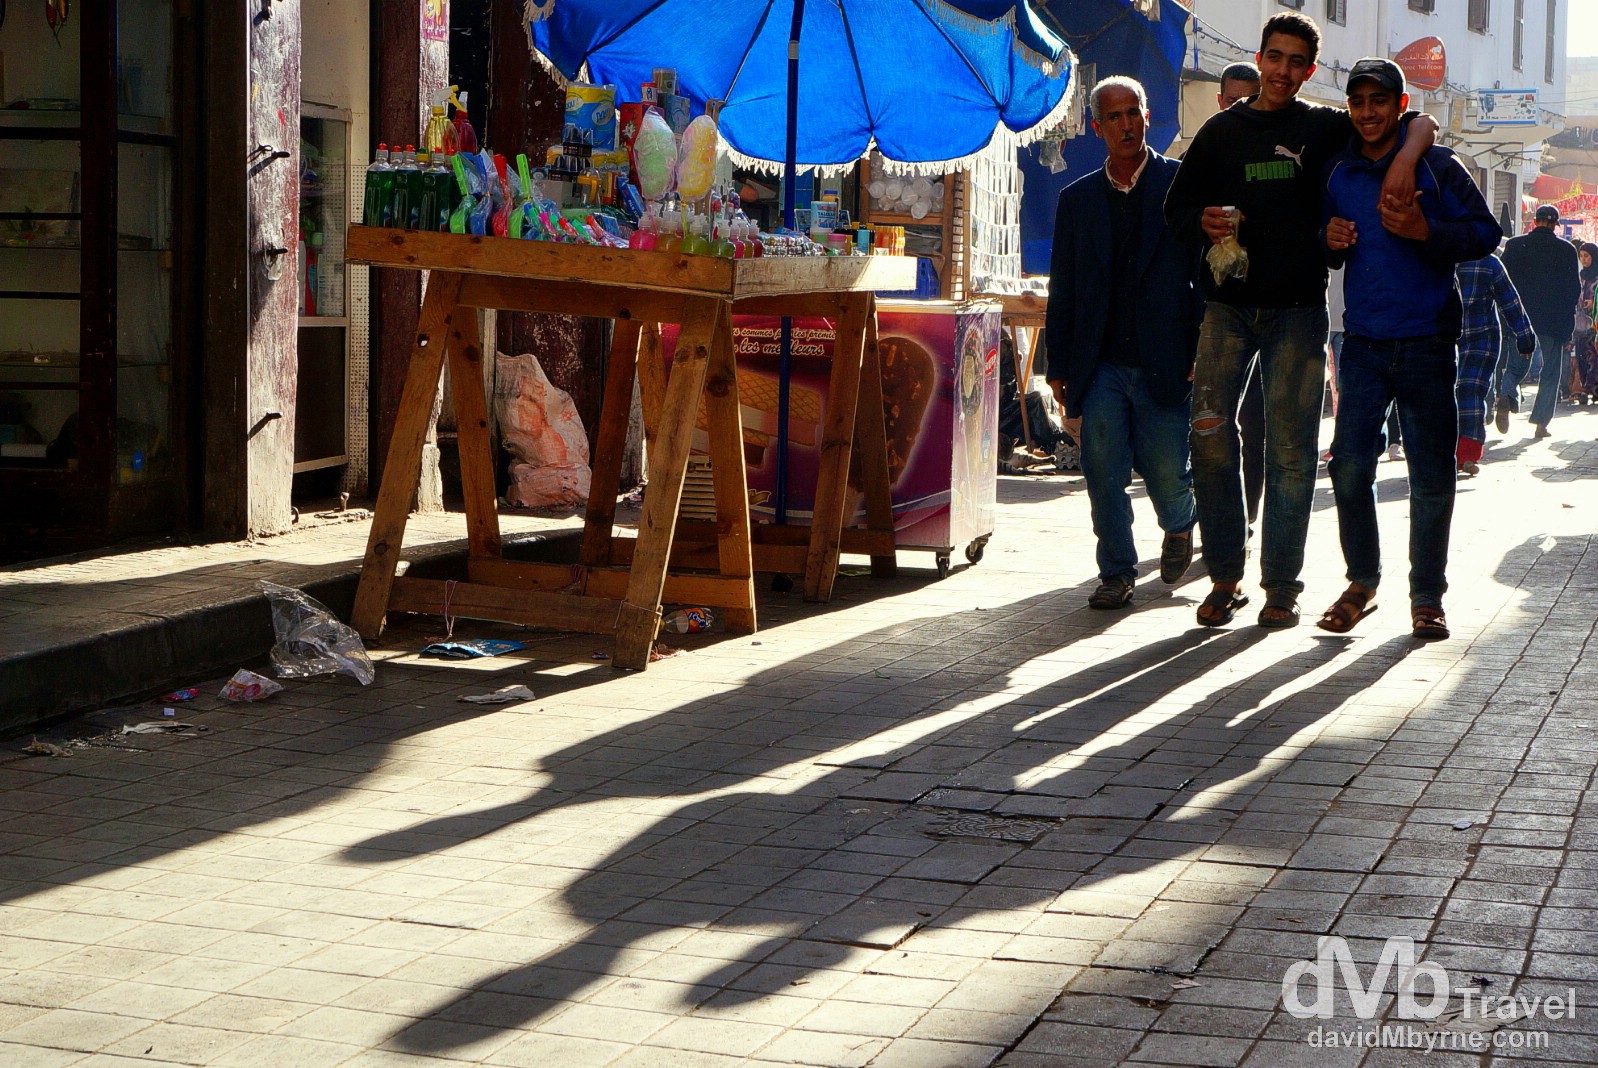 Shadows & bromance in the lanes of the Ancienne Medina in Casablanca, Morocco. April 28th, 2014.